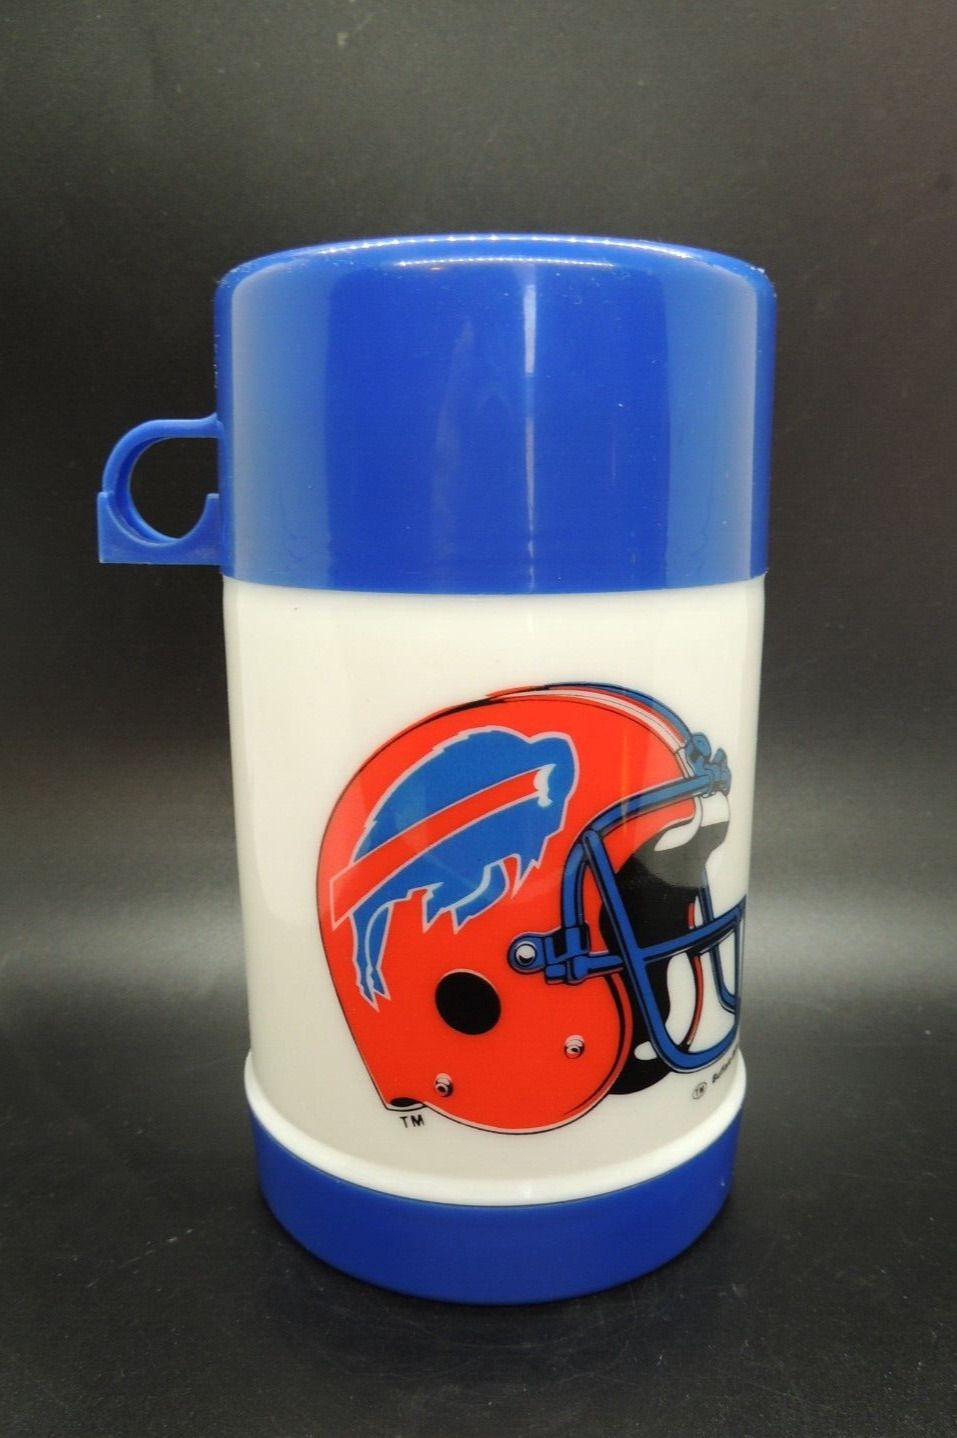 Vintage Buffalo Bills Plastic Thermos 1990s Football Red Helmet Collectible